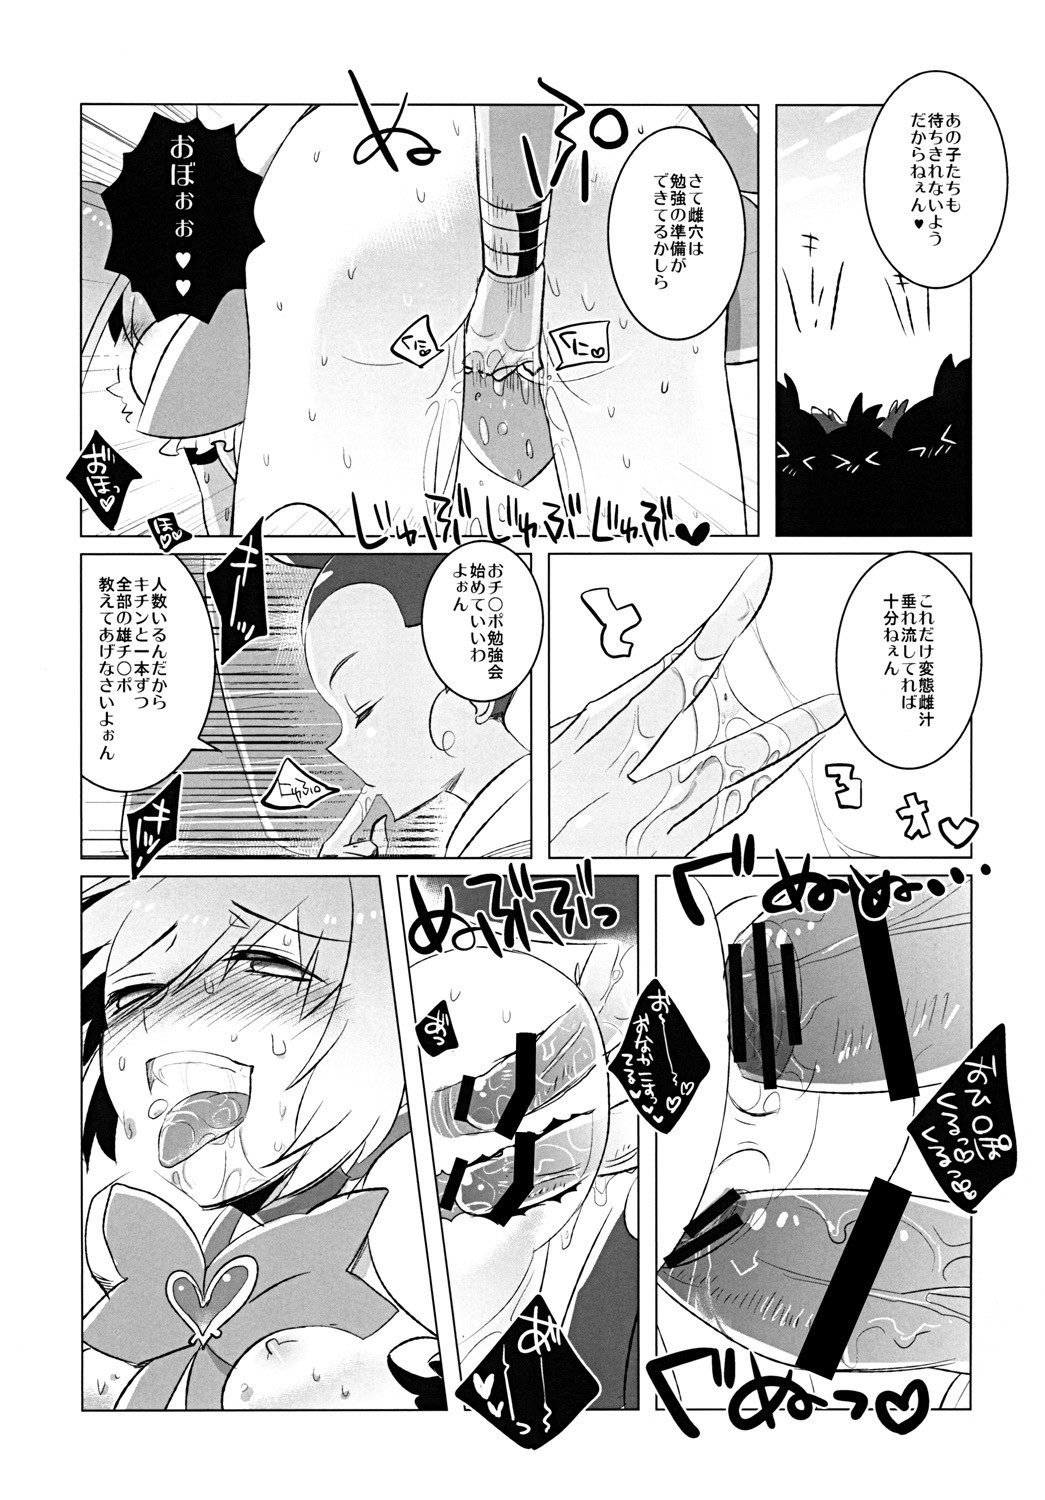 [clear glass (menimo)] Kite Mite Sawatte ☆ (Heart Catch Precure!) page 14 full